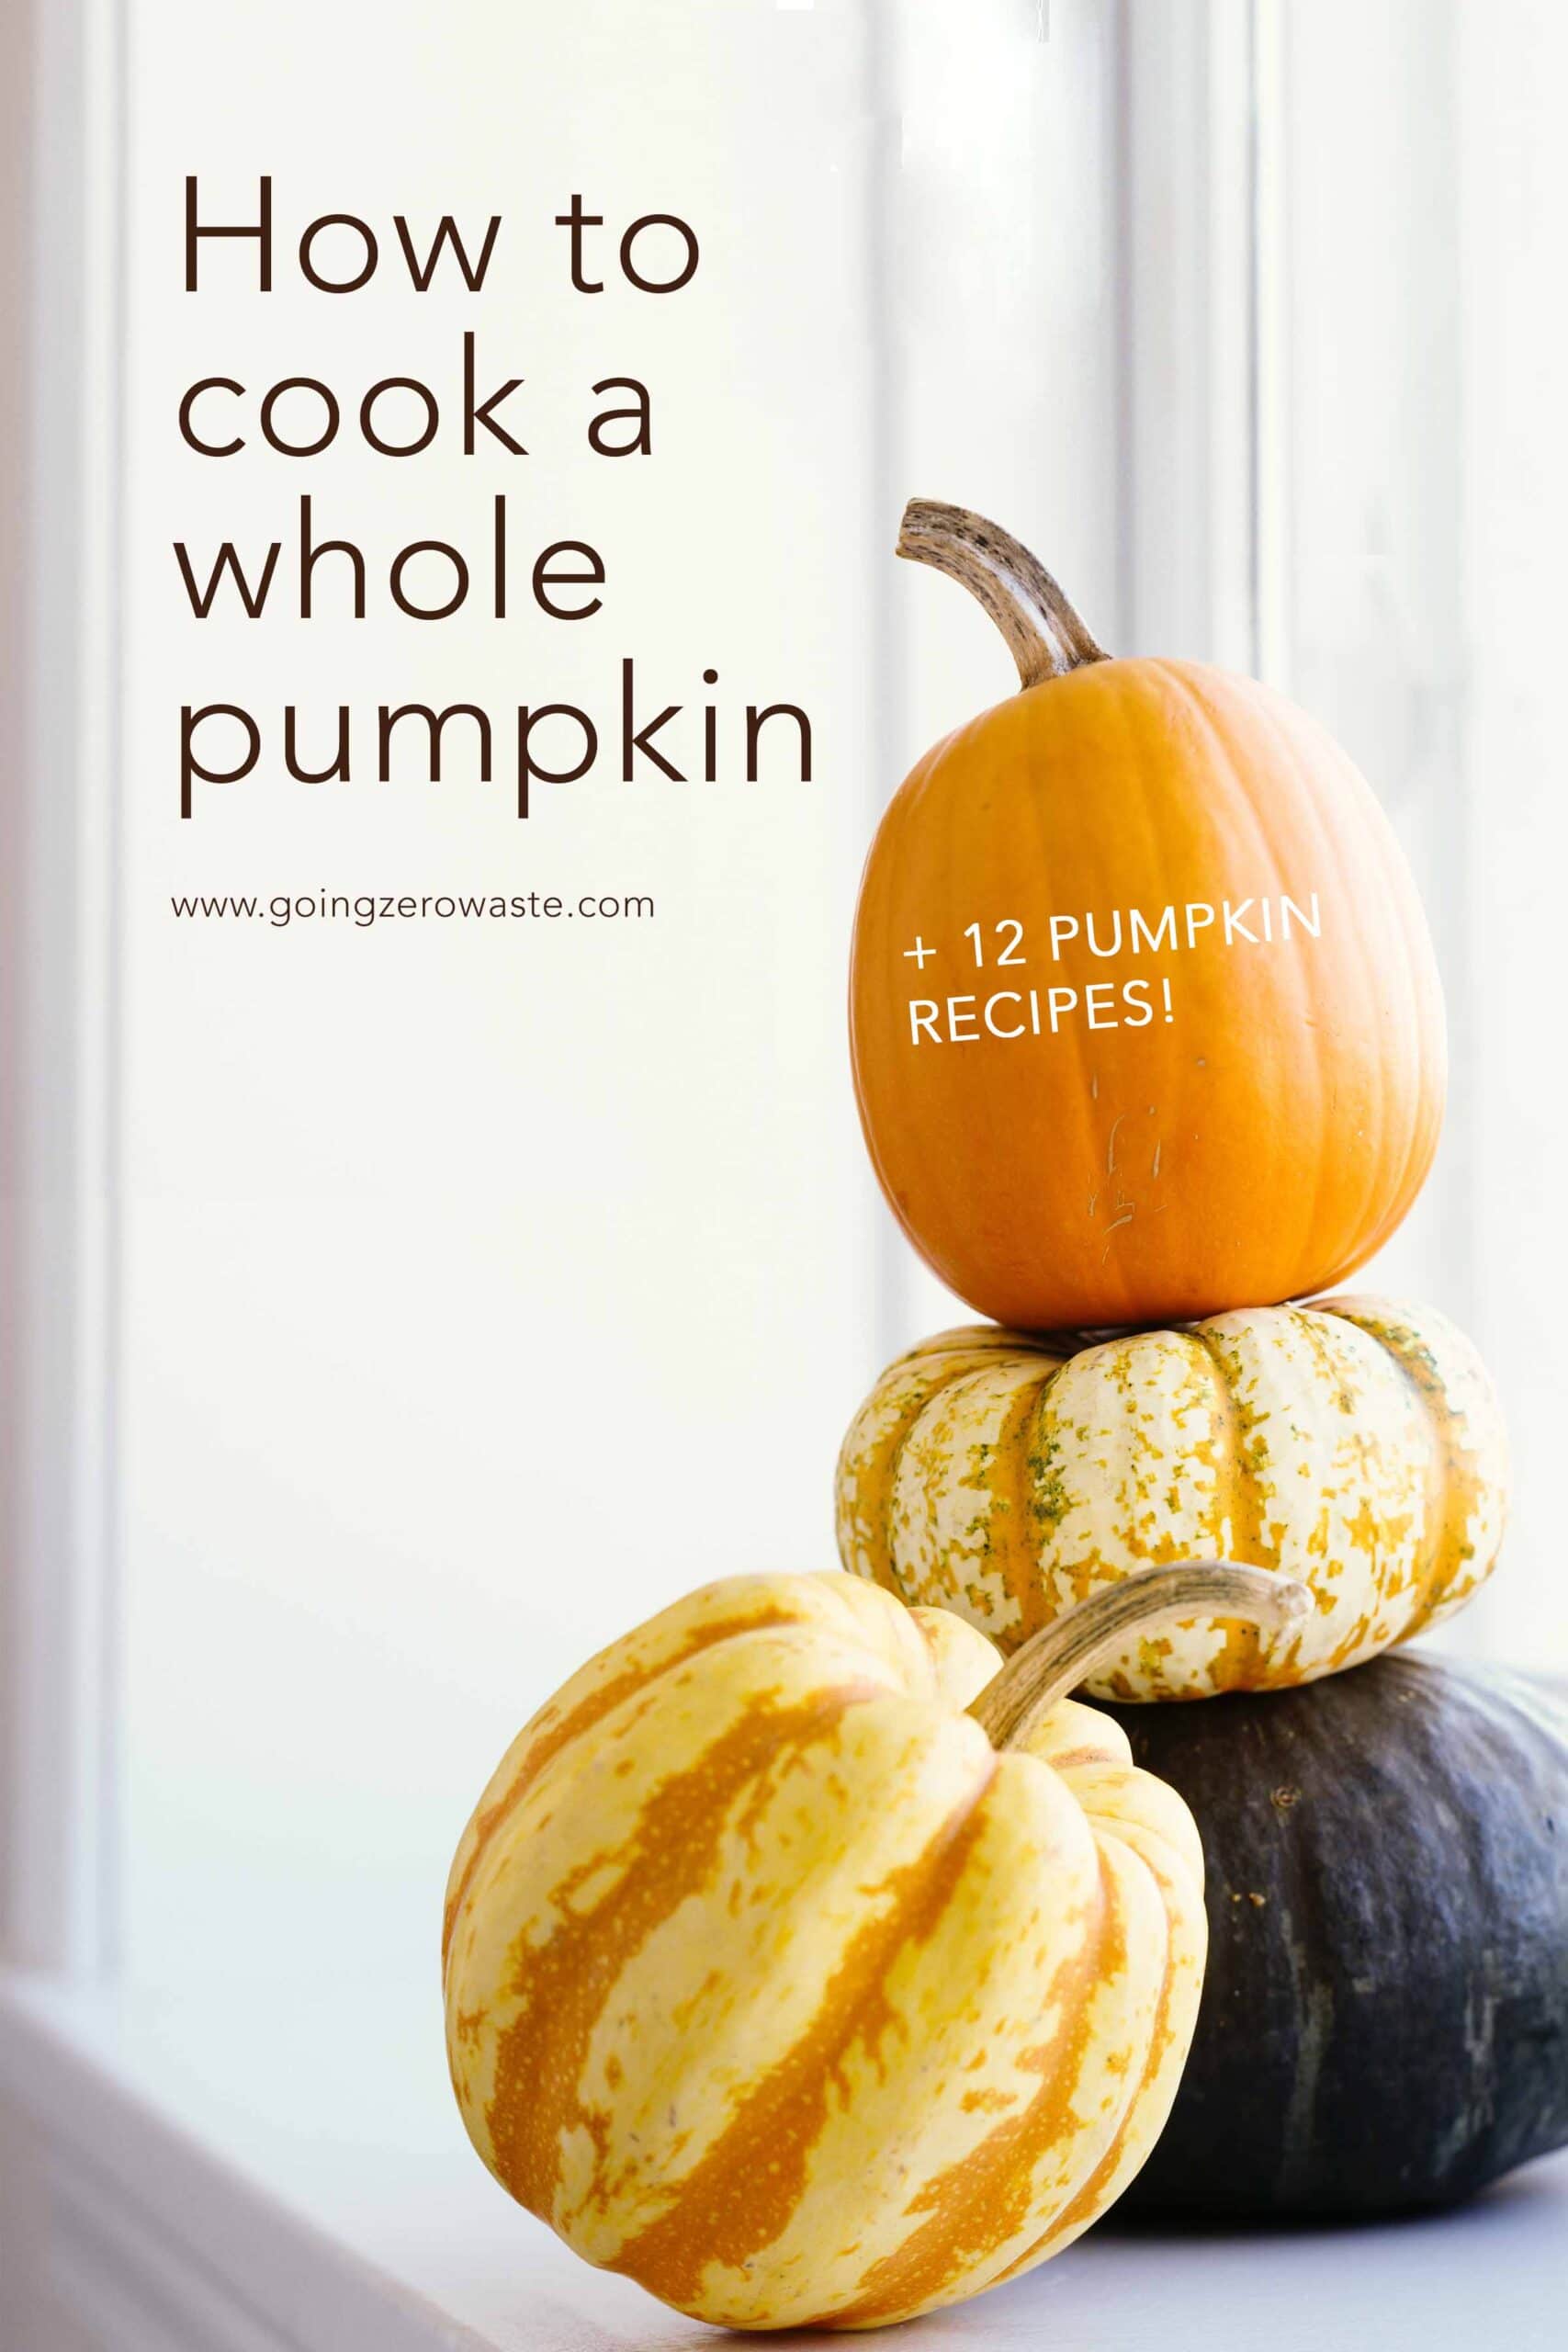 How to Cook a Whole Pumpkin